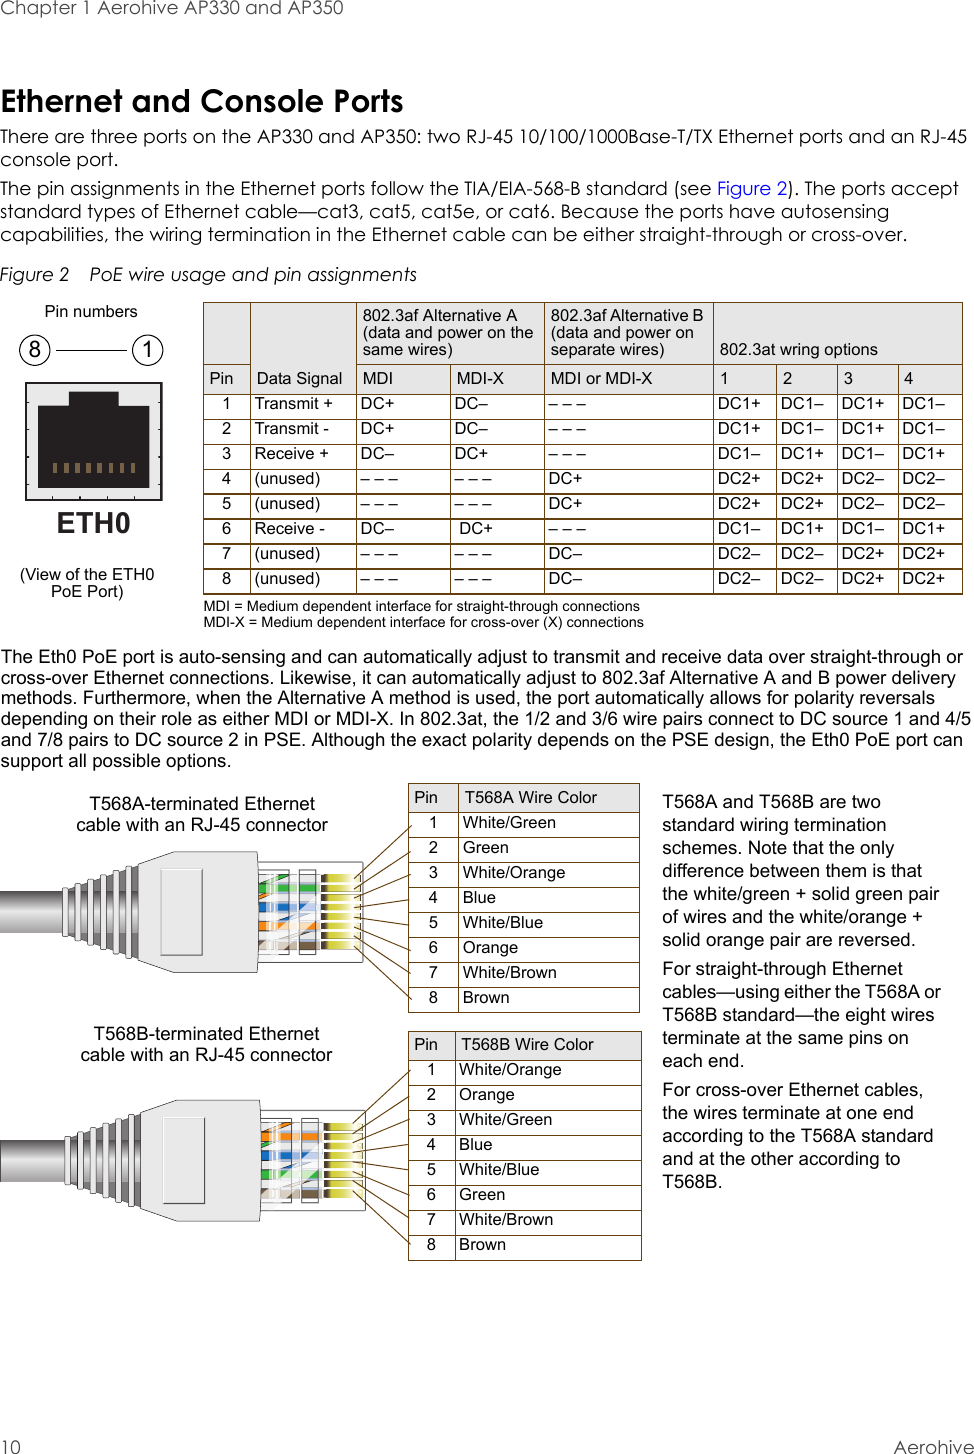 Chapter 1 Aerohive AP330 and AP35010 AerohiveEthernet and Console PortsThere are three ports on the AP330 and AP350: two RJ-45 10/100/1000Base-T/TX Ethernet ports and an RJ-45 console port.The pin assignments in the Ethernet ports follow the TIA/EIA-568-B standard (see Figure 2). The ports accept standard types of Ethernet cable—cat3, cat5, cat5e, or cat6. Because the ports have autosensing capabilities, the wiring termination in the Ethernet cable can be either straight-through or cross-over.Figure 2  PoE wire usage and pin assignmentsETH0Pin T568A Wire Color1 White/Green2 Green3 White/Orange4Blue5 White/Blue6 Orange7 White/Brown8Brown(View of the ETH0 PoE Port)8 1Pin numbersPin T568B Wire Color1 White/Orange2 Orange3 White/Green4Blue5 White/Blue6 Green7 White/Brown8BrownT568A-terminated Ethernet cable with an RJ-45 connectorData Signal802.3af Alternative A (data and power on the same wires)802.3af Alternative B (data and power on separate wires) 802.3at wring optionsPin MDI MDI-X MDI or MDI-X 1 2 3 41 Transmit + DC+ DC– – – – DC1+ DC1– DC1+ DC1–2 Transmit - DC+ DC– – – – DC1+ DC1– DC1+ DC1–3 Receive + DC– DC+ – – – DC1– DC1+ DC1– DC1+4 (unused) – – – – – – DC+ DC2+ DC2+ DC2– DC2–5 (unused) – – – – – – DC+ DC2+ DC2+ DC2– DC2–6 Receive - DC–  DC+ – – – DC1– DC1+ DC1– DC1+7 (unused) – – – – – – DC– DC2– DC2– DC2+ DC2+8 (unused) – – – – – – DC– DC2– DC2– DC2+ DC2+MDI = Medium dependent interface for straight-through connectionsMDI-X = Medium dependent interface for cross-over (X) connectionsThe Eth0 PoE port is auto-sensing and can automatically adjust to transmit and receive data over straight-through or cross-over Ethernet connections. Likewise, it can automatically adjust to 802.3af Alternative A and B power delivery methods. Furthermore, when the Alternative A method is used, the port automatically allows for polarity reversals depending on their role as either MDI or MDI-X. In 802.3at, the 1/2 and 3/6 wire pairs connect to DC source 1 and 4/5 and 7/8 pairs to DC source 2 in PSE. Although the exact polarity depends on the PSE design, the Eth0 PoE port can support all possible options.T568B-terminated Ethernet cable with an RJ-45 connectorT568A and T568B are two standard wiring termination schemes. Note that the only difference between them is that the white/green + solid green pair of wires and the white/orange + solid orange pair are reversed.For straight-through Ethernet cables—using either the T568A or T568B standard—the eight wires terminate at the same pins on each end.For cross-over Ethernet cables, the wires terminate at one end according to the T568A standard and at the other according to T568B.